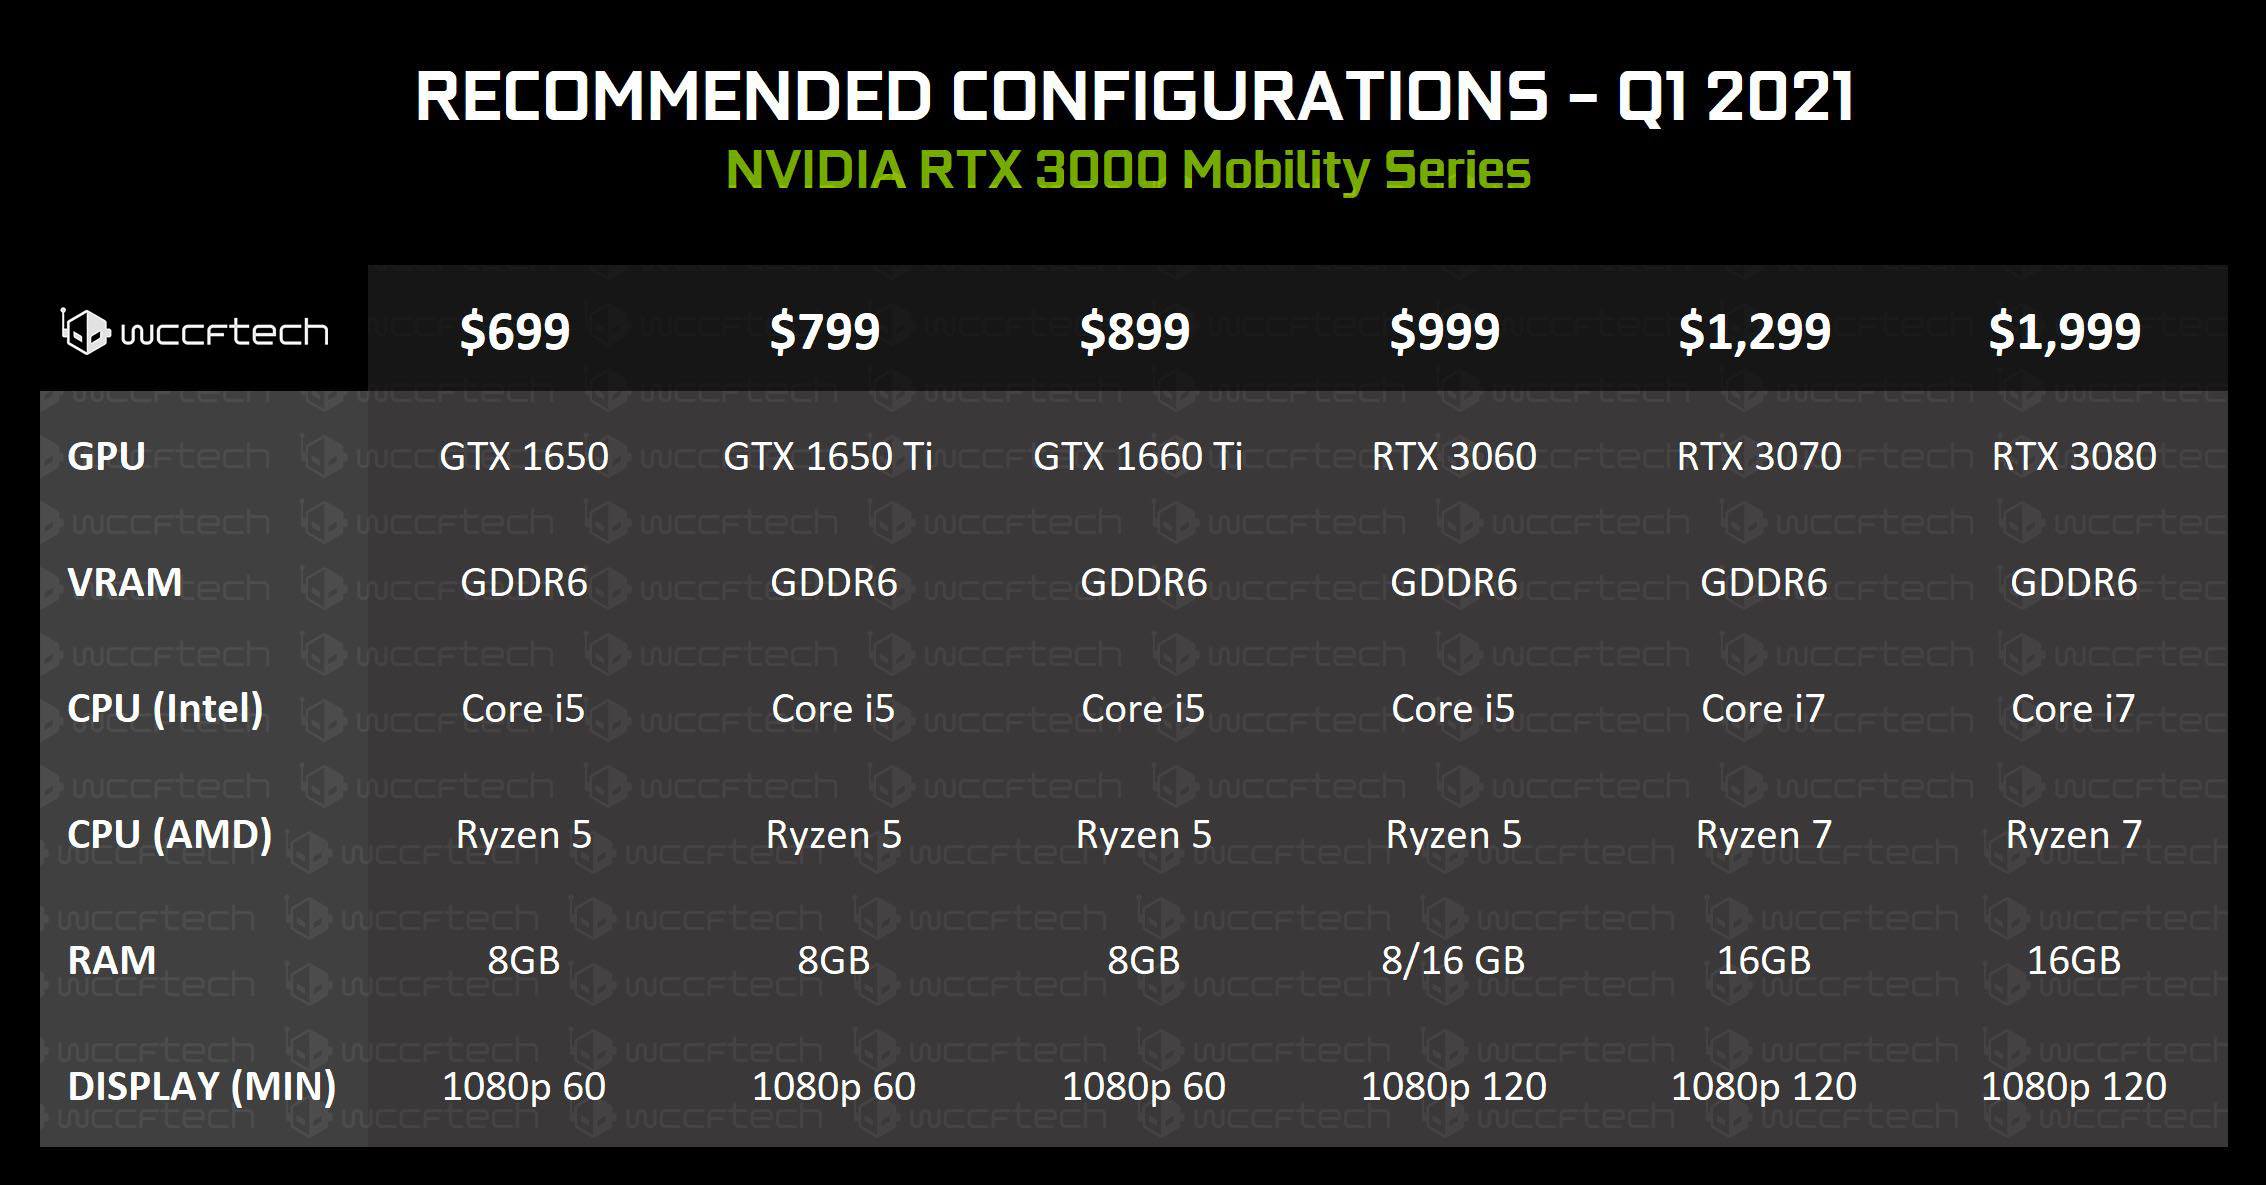 NVIDIA GeForce RTX 3070+ Mobile GPUs to be offered with AMD Ryzen 7